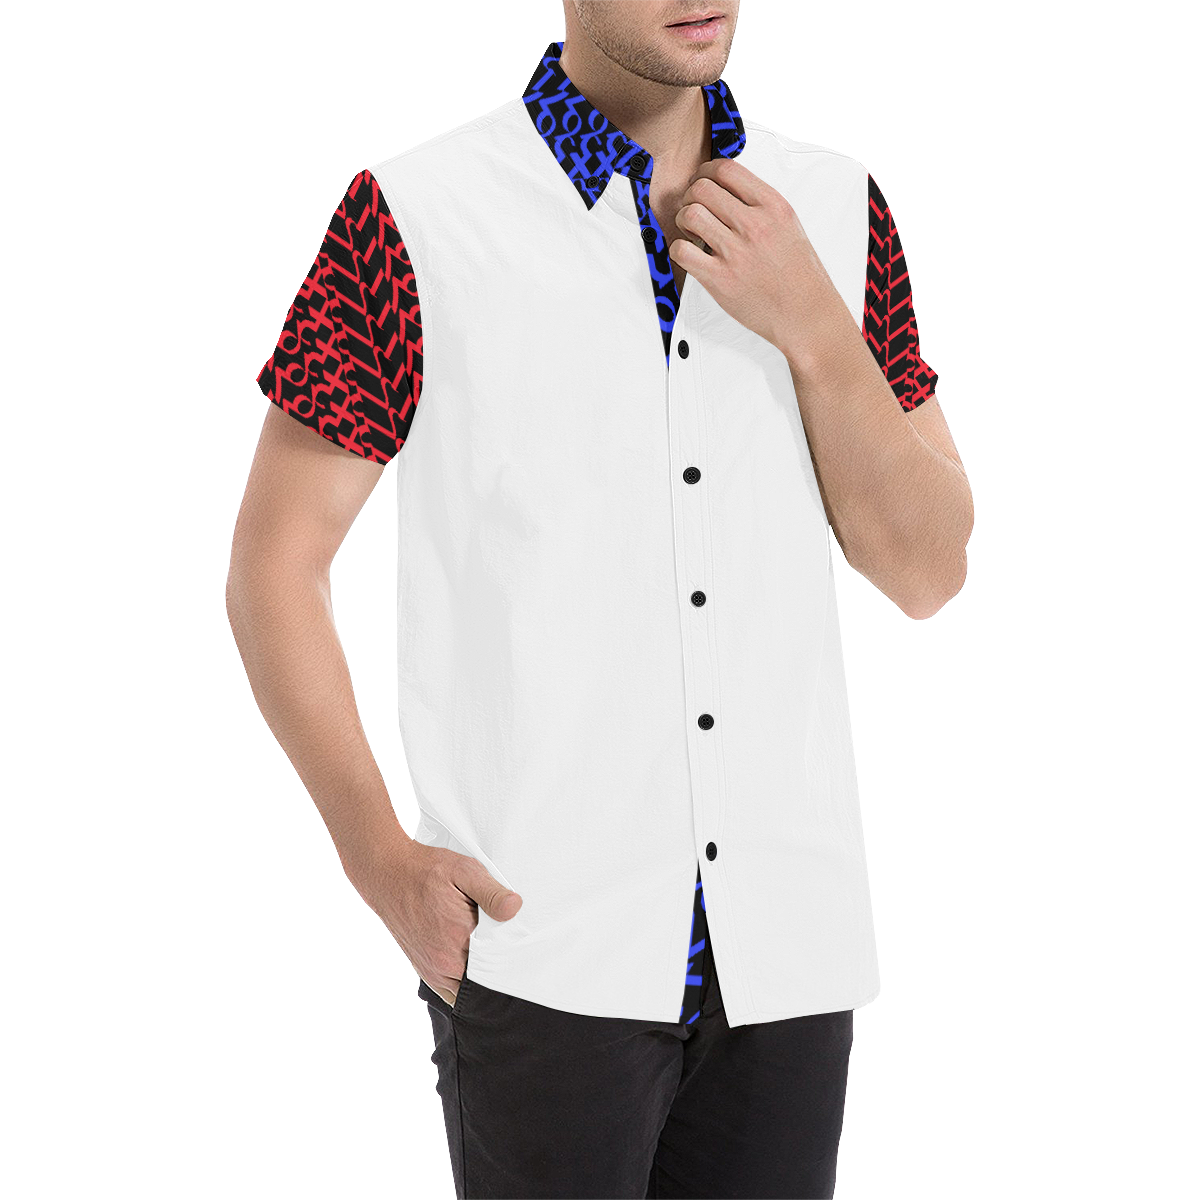 NUMBERS Collection 1234567 "Reverse" White Split collar/sleeves Men's All Over Print Short Sleeve Shirt (Model T53)